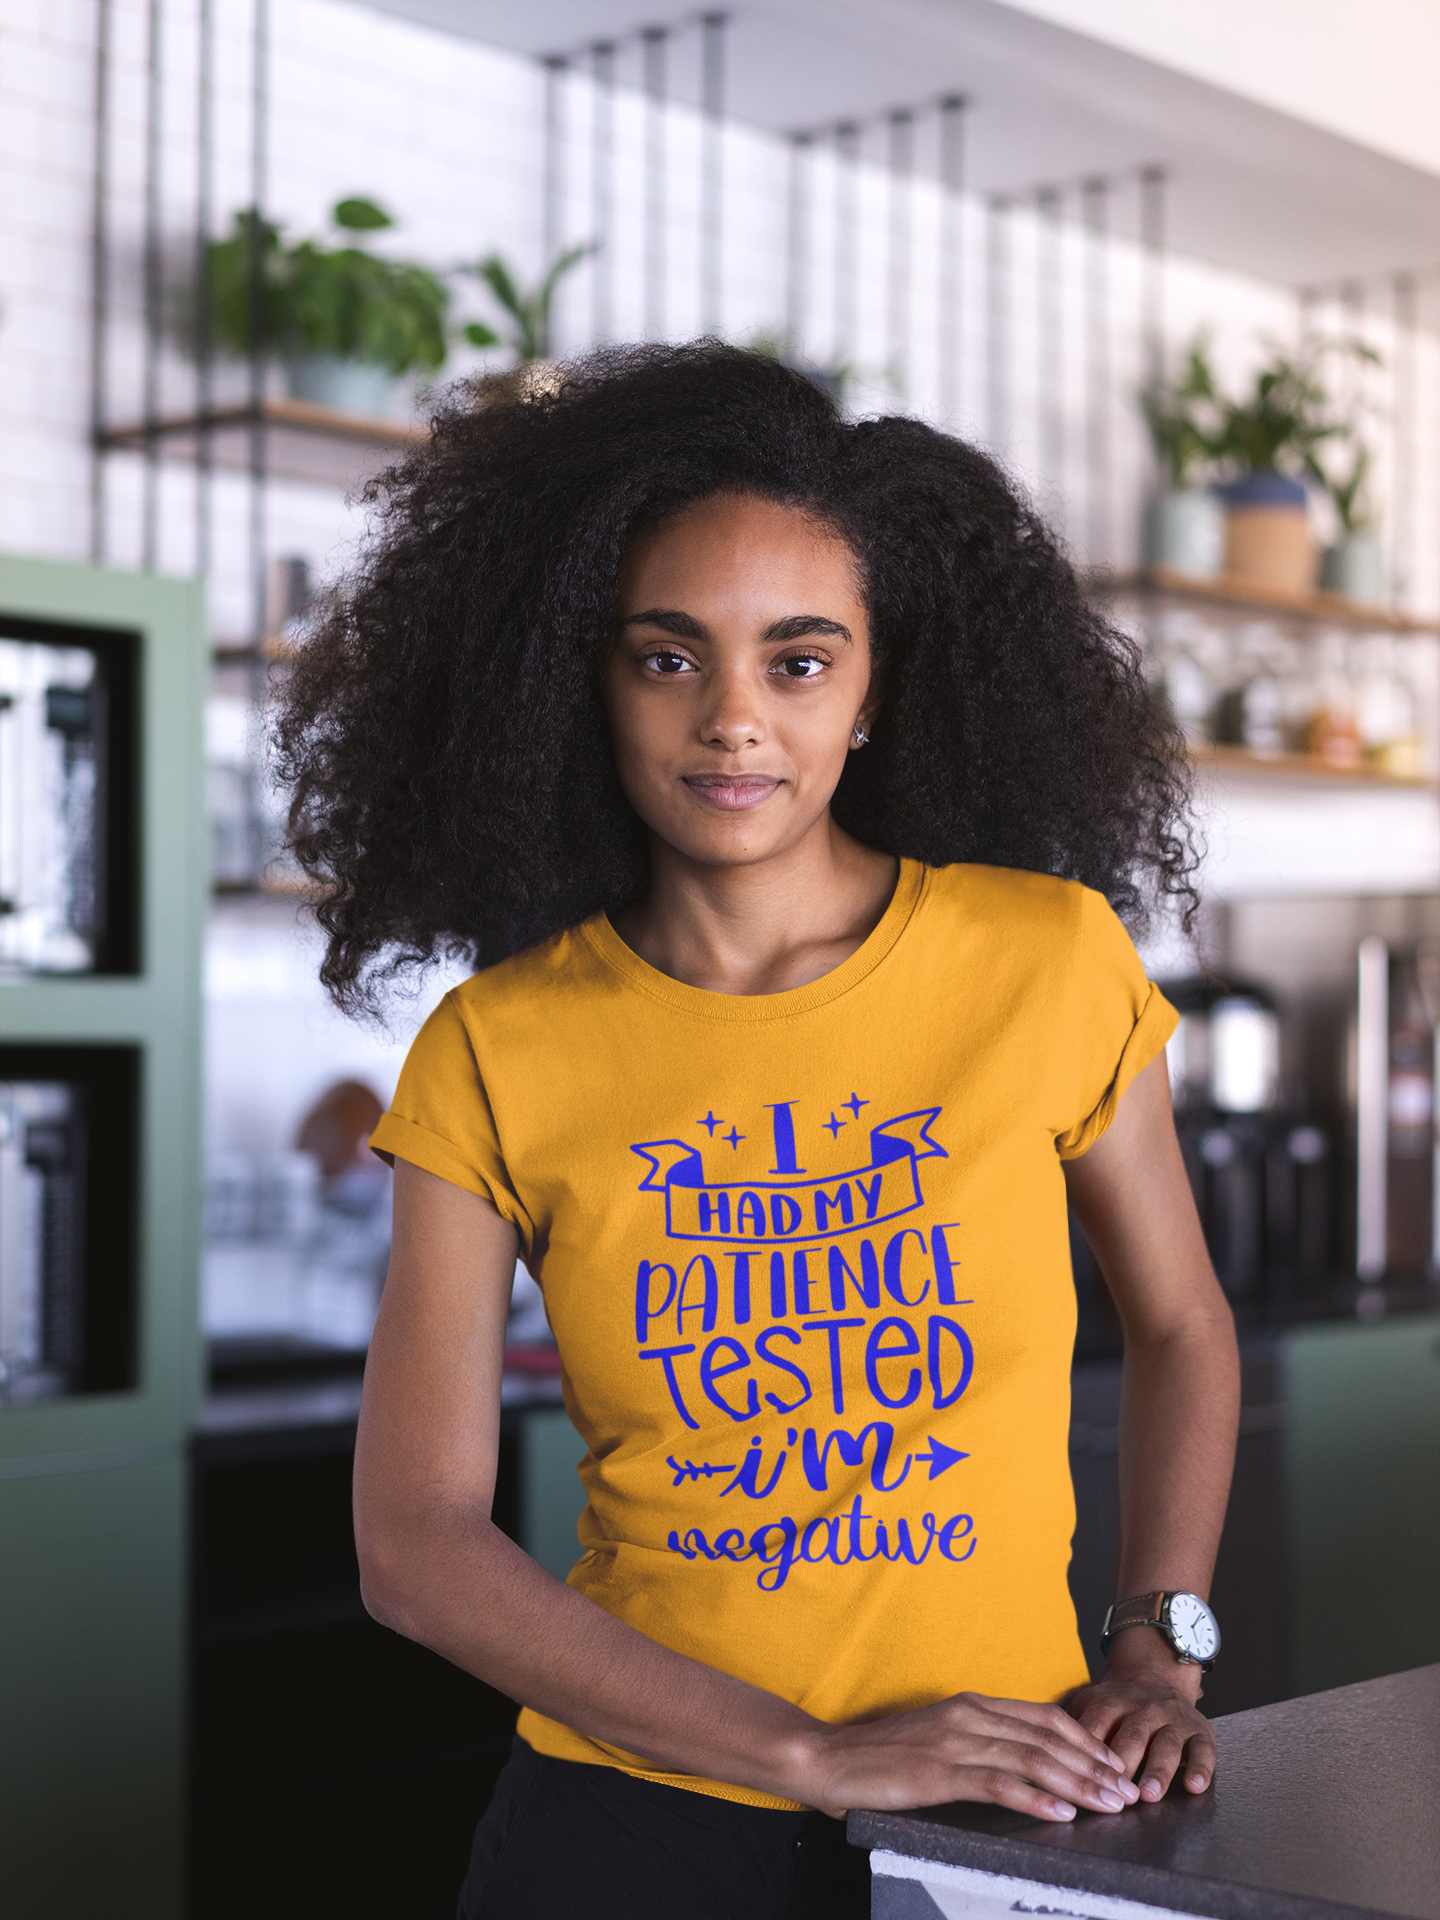 I Had My Patience Tested I'm Negative Royal Unisex Fit Shirt